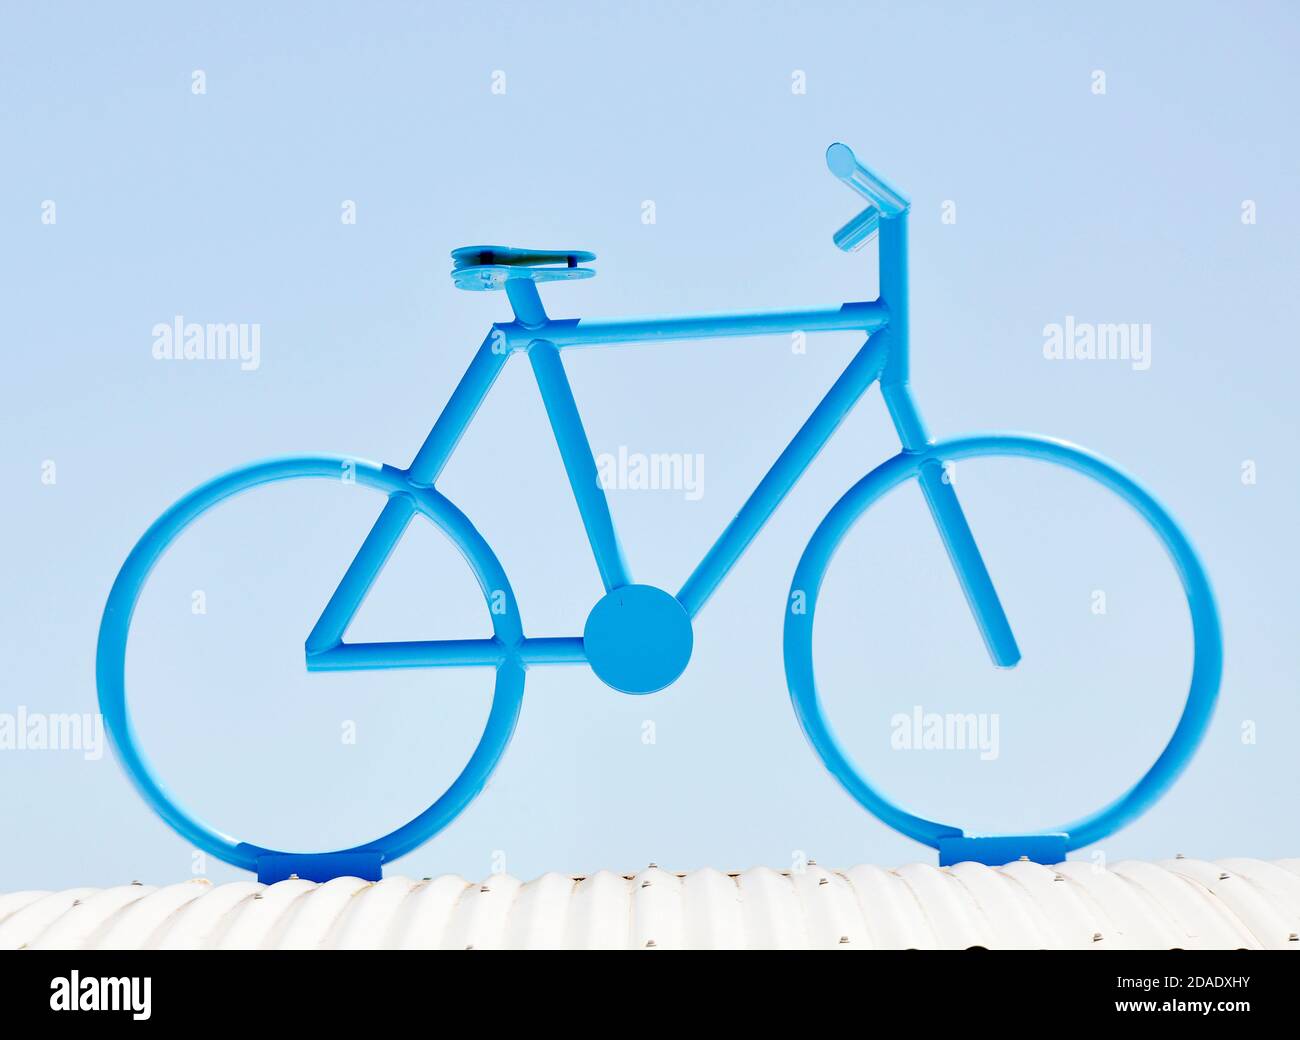 Rooftop model of a bicycle painted blue against a blue sky Stock Photo